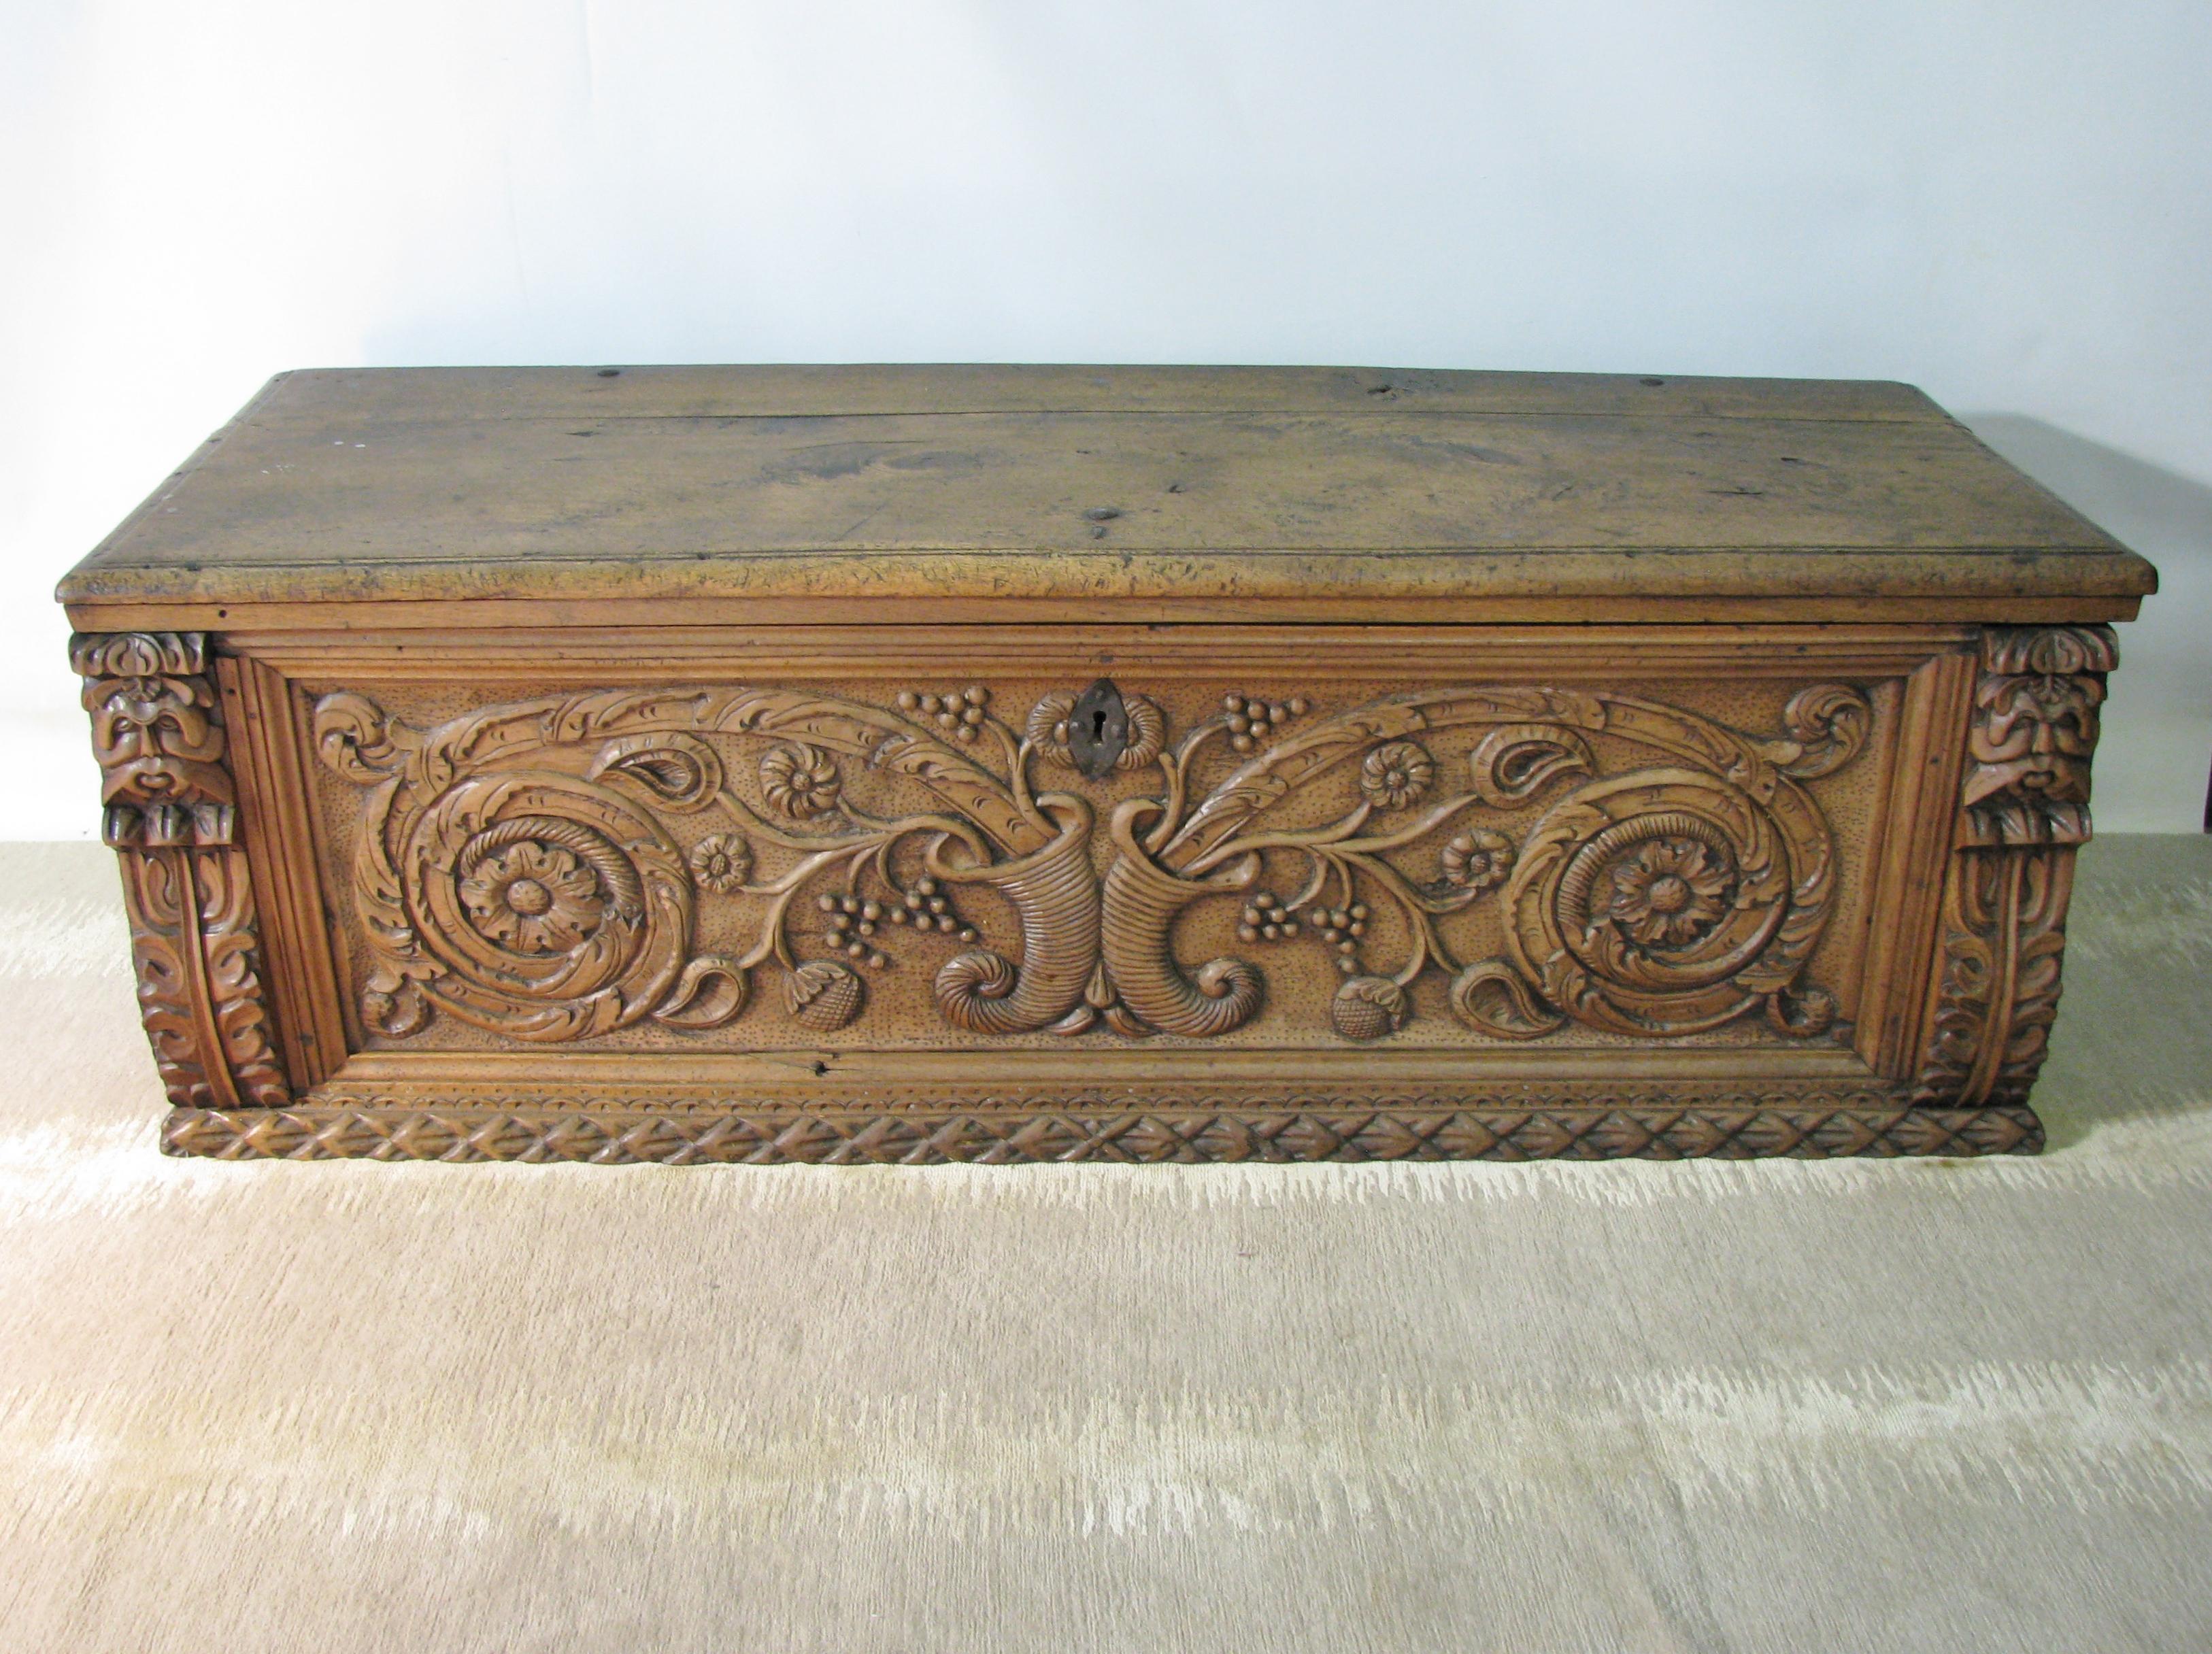 Beautifully crafted early 18th century Italian walnut cassone, or trunk. Heavy piece, made of thick, solid planks of wood. The front is deeply carved with an elaborate scroll-work motif emanating from twin cornucopias. The scrolls incorporate grapes